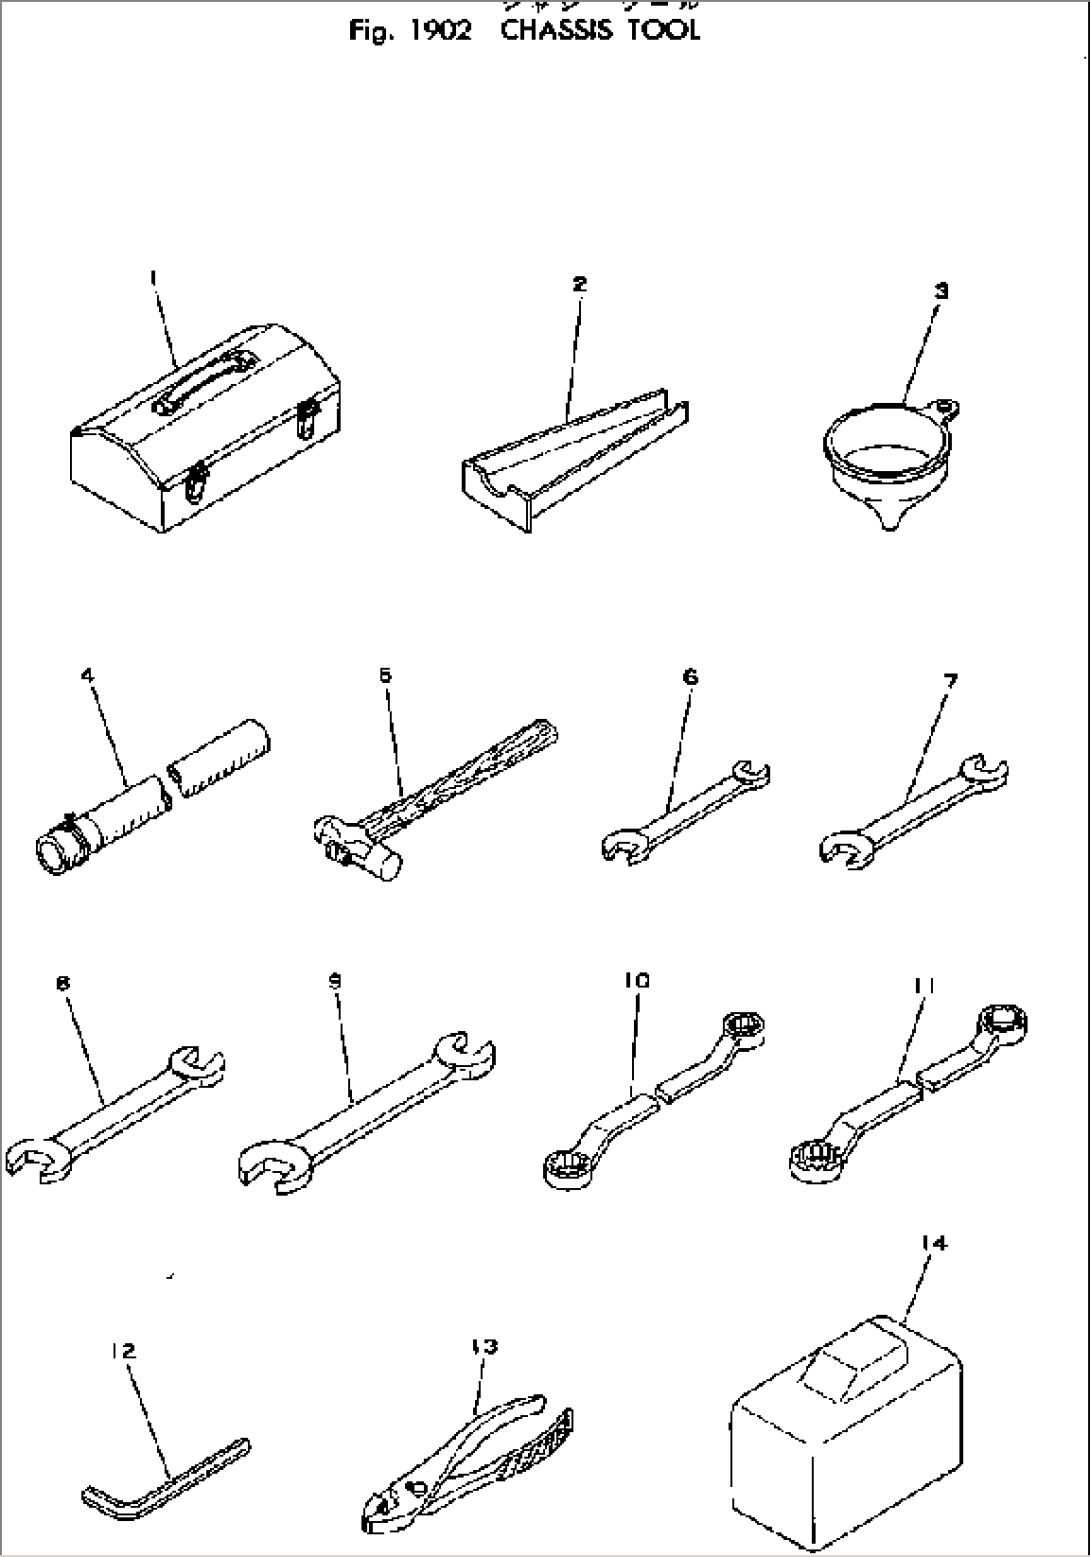 CHASSIS TOOL